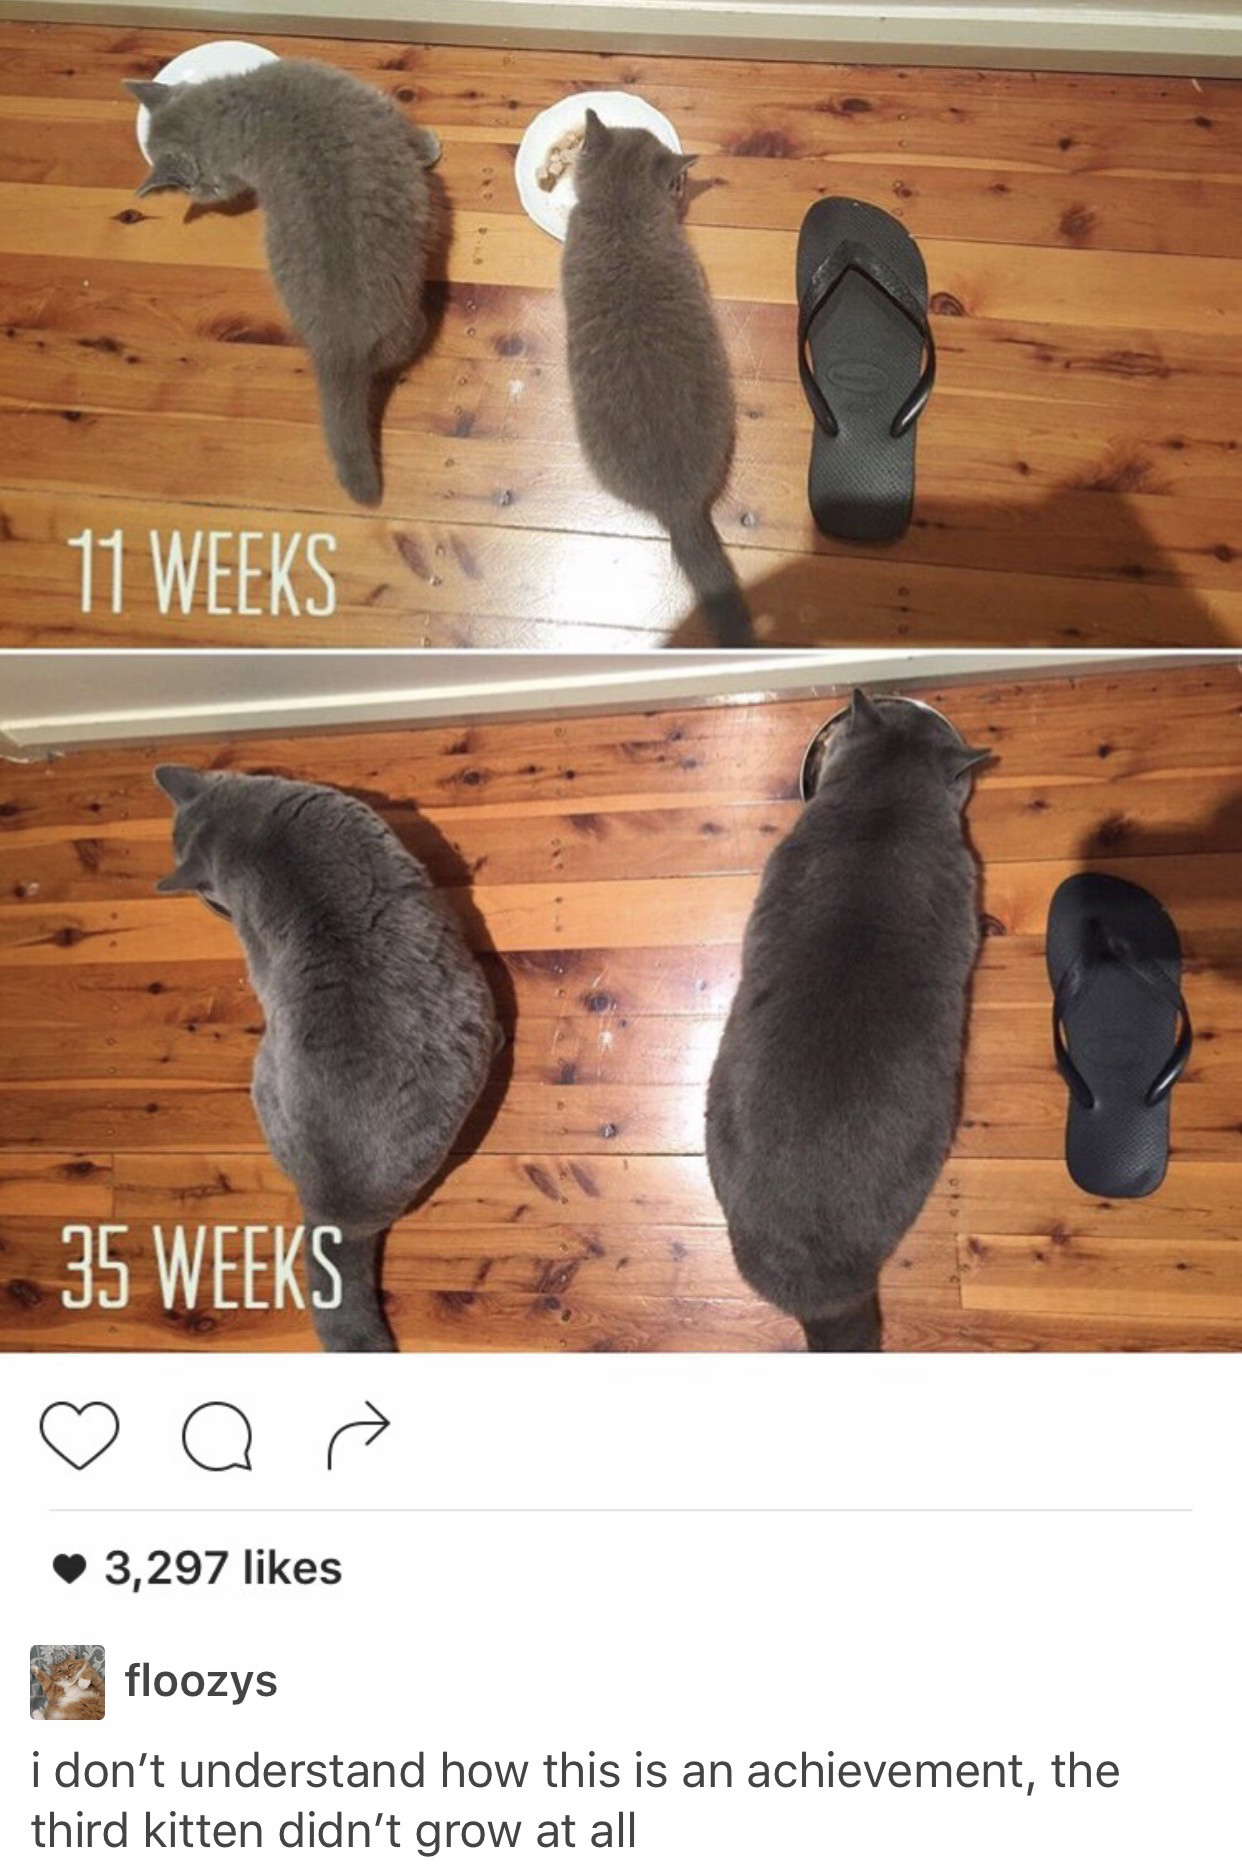 11 Weeks 35 Weeks o " 3,297 floozys i don't understand how this is an achievement, the third kitten didn't grow at all